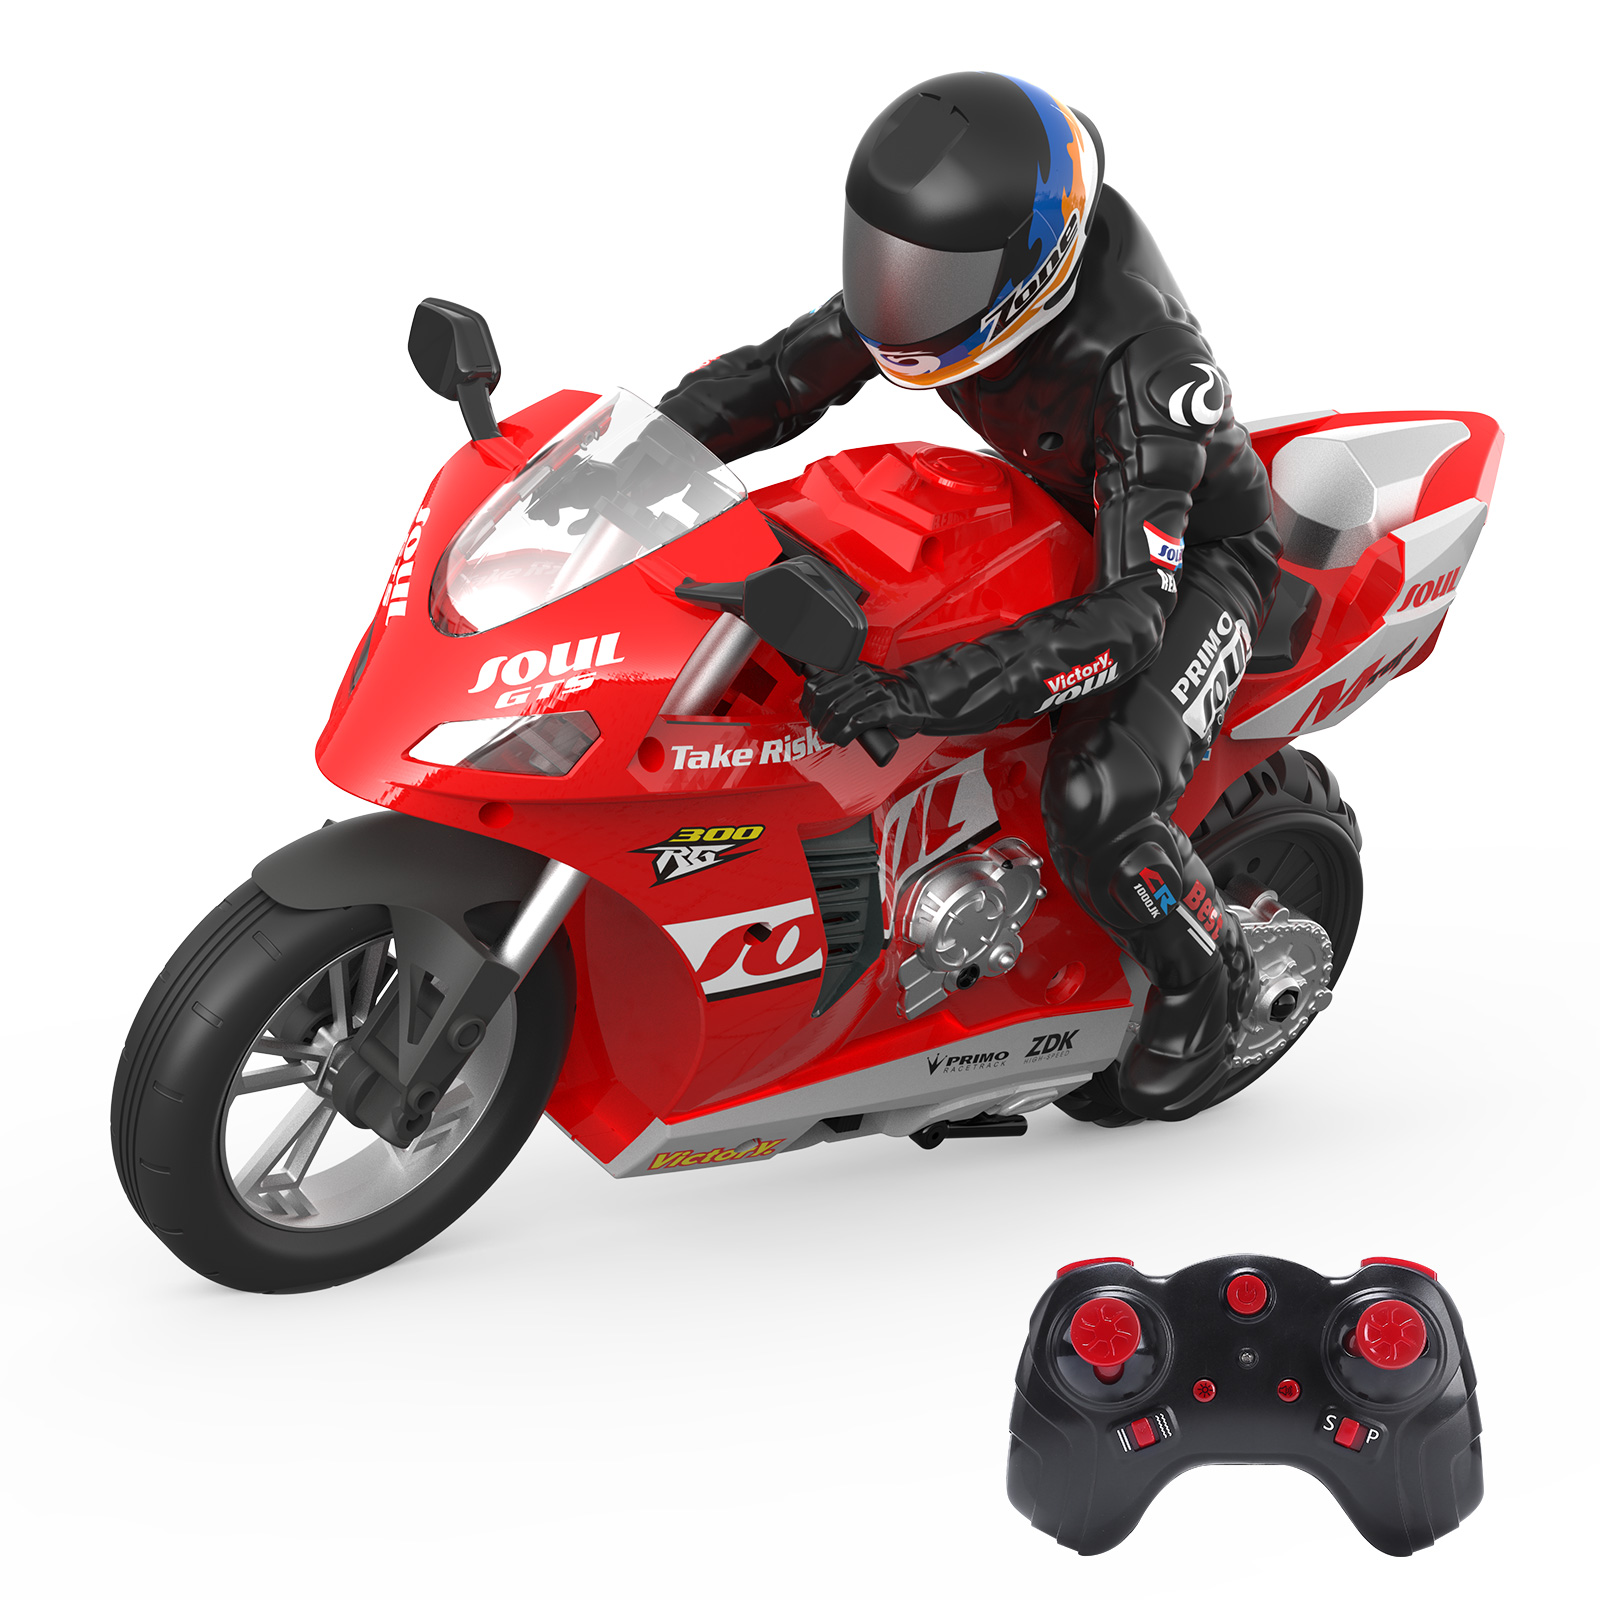  radio-controller bike radio-controller motorcycle DEERC radio controlled car RC Stunt toy 1/6 automatic balance 6 axis Gyro installing . wheel possible to run talent drift Christmas present 